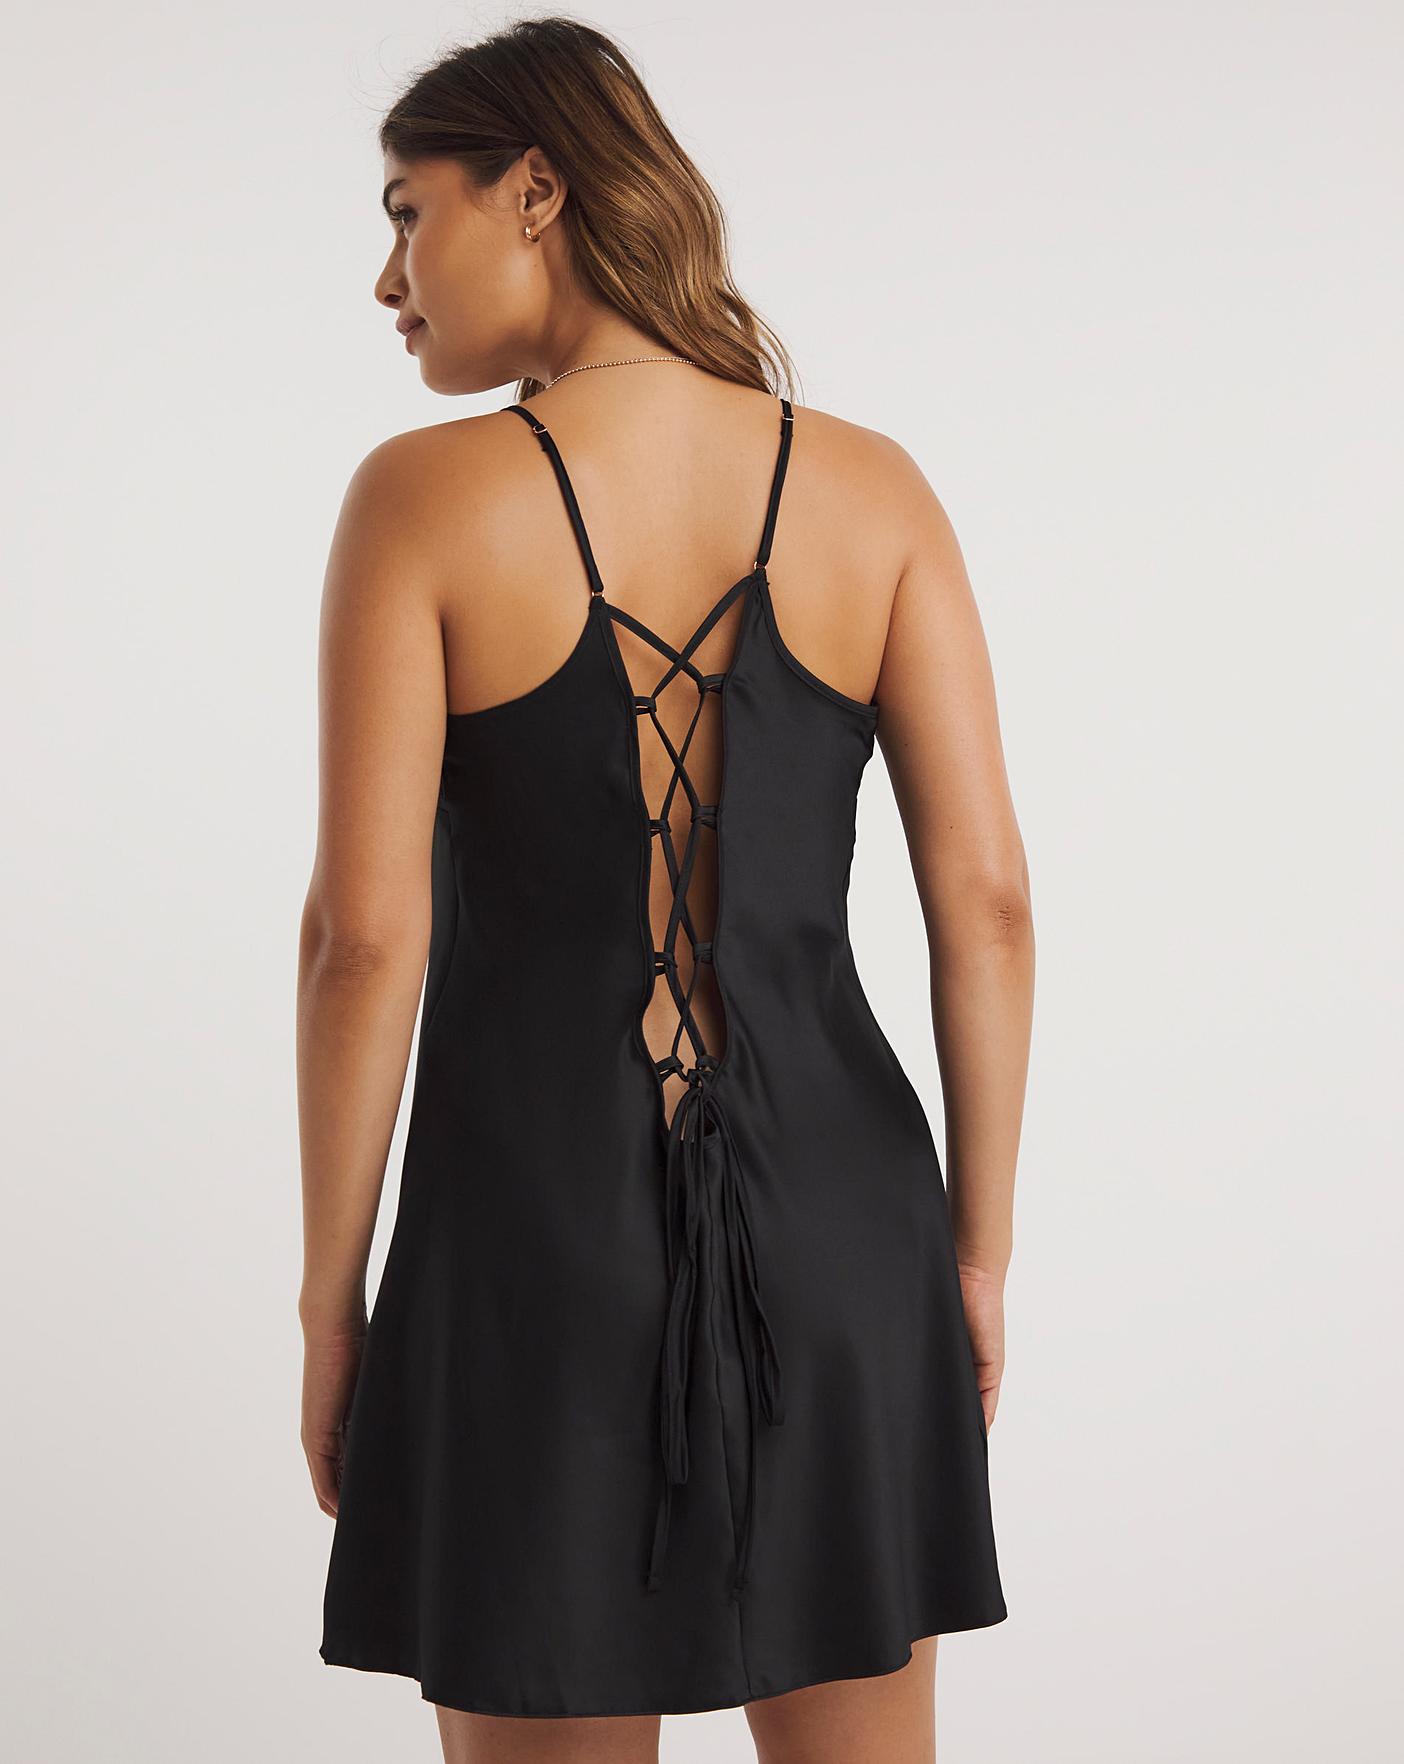 Shop Women's Marisota Chemises and Slips up to 70% Off